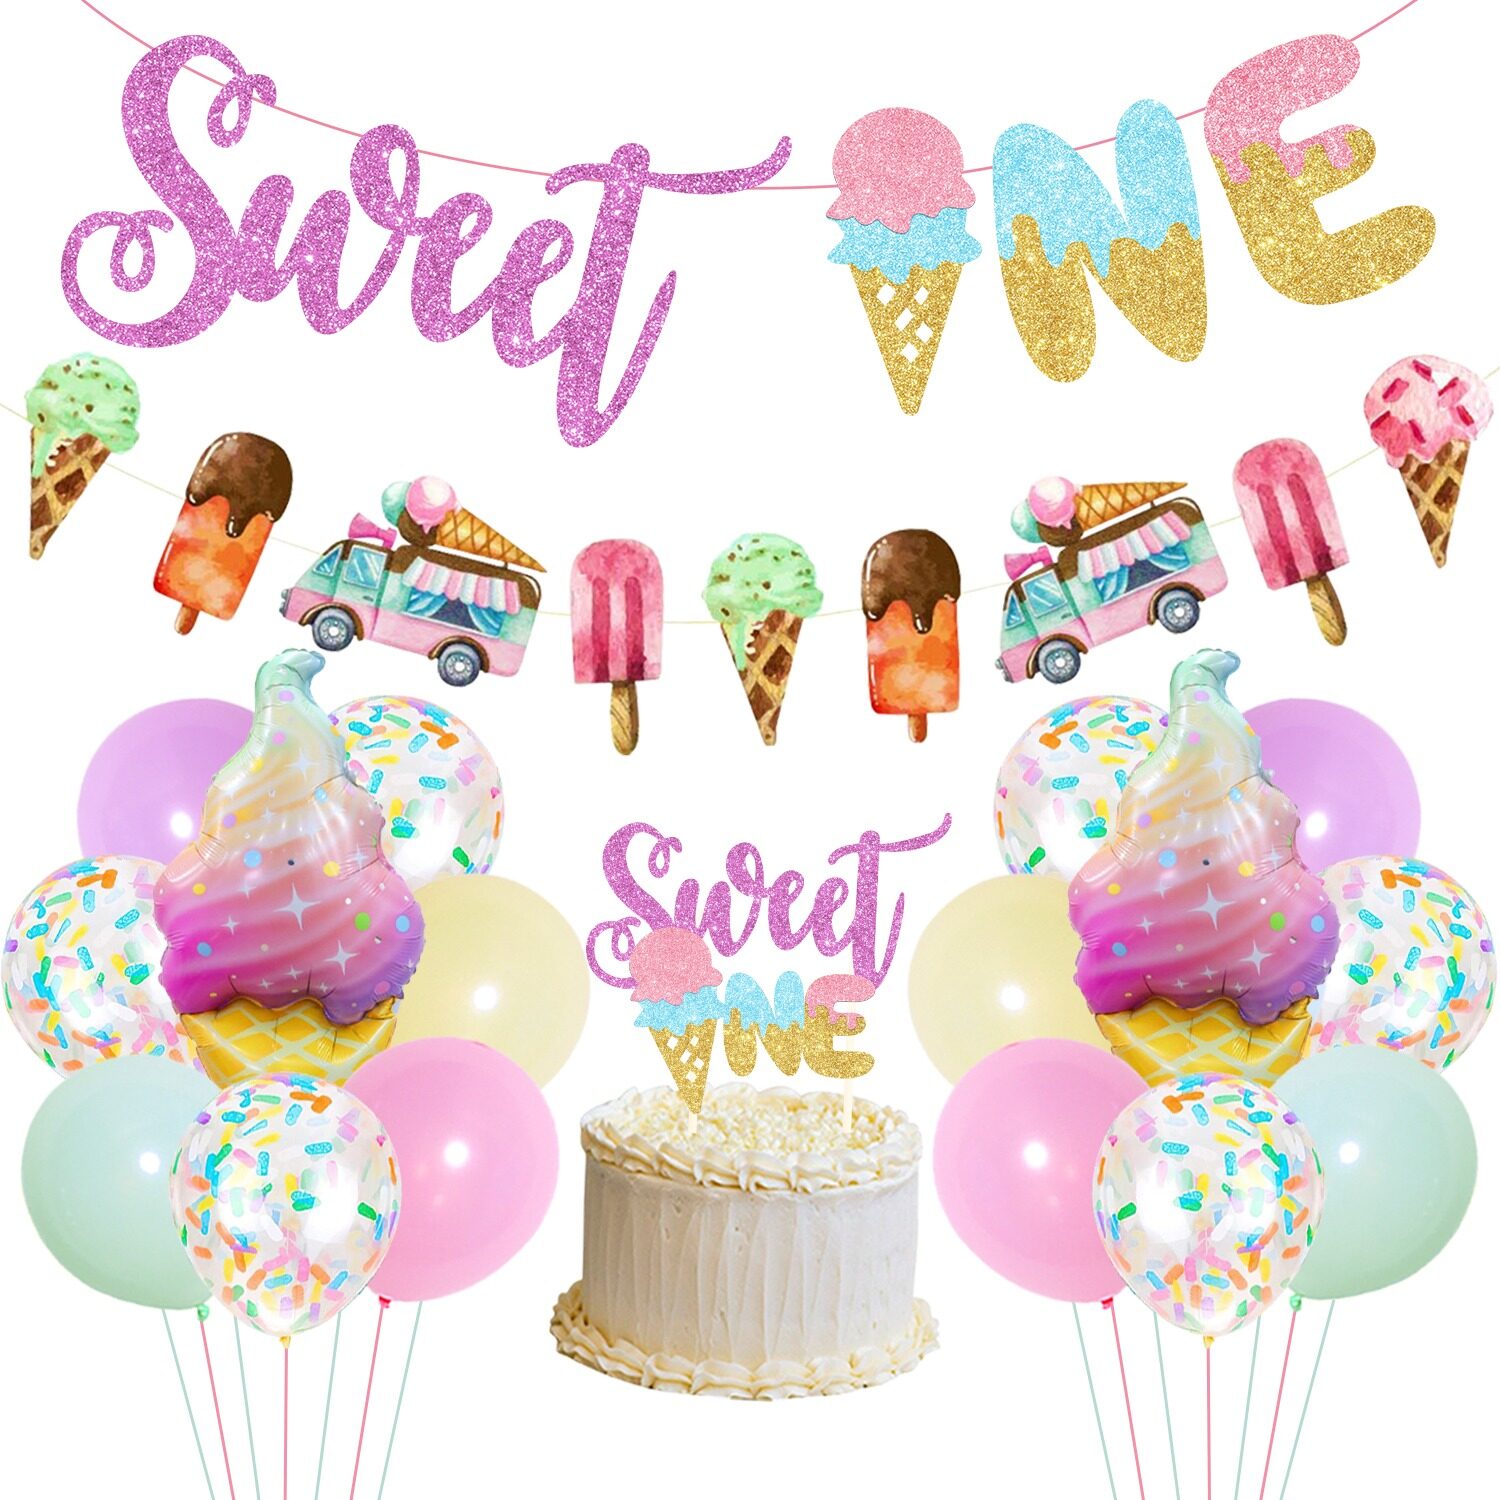 Cheereveal Sweet One Birthday Party Decorations Ice Cream 1st Decor With Glitter Banner Cake Topper And Balloons For Girl Supplies